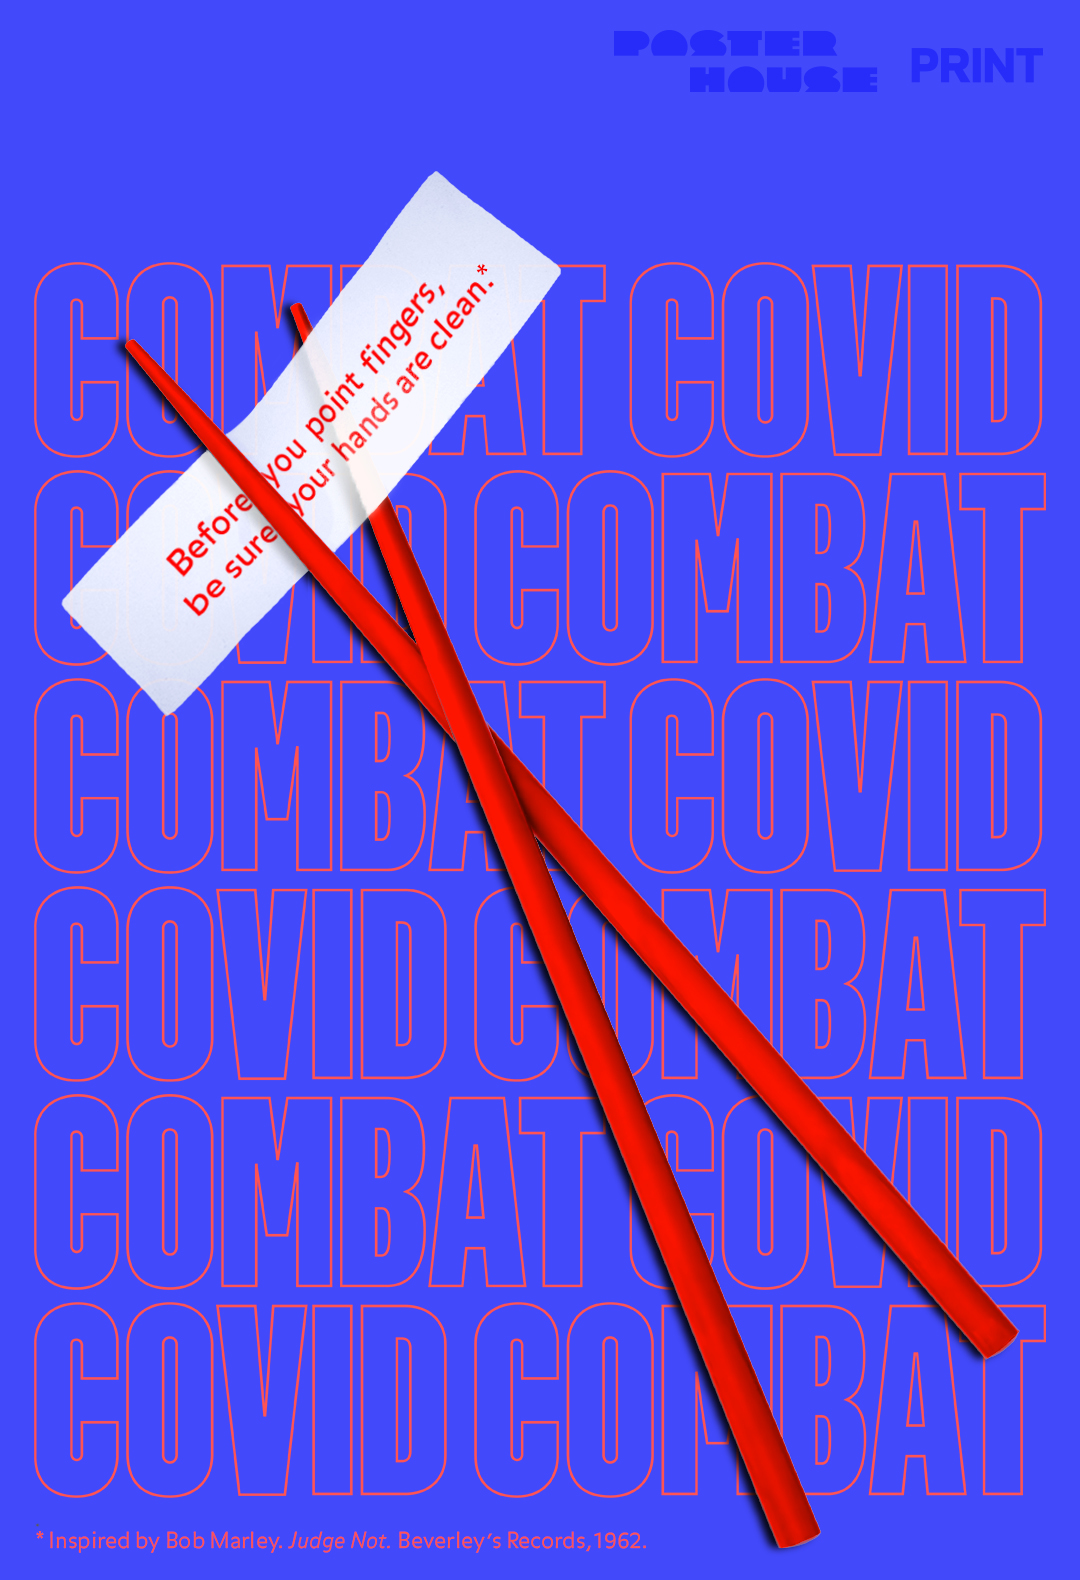 A poster combating covid features a pair of red chopsticks holding a message in the form of a fortune.